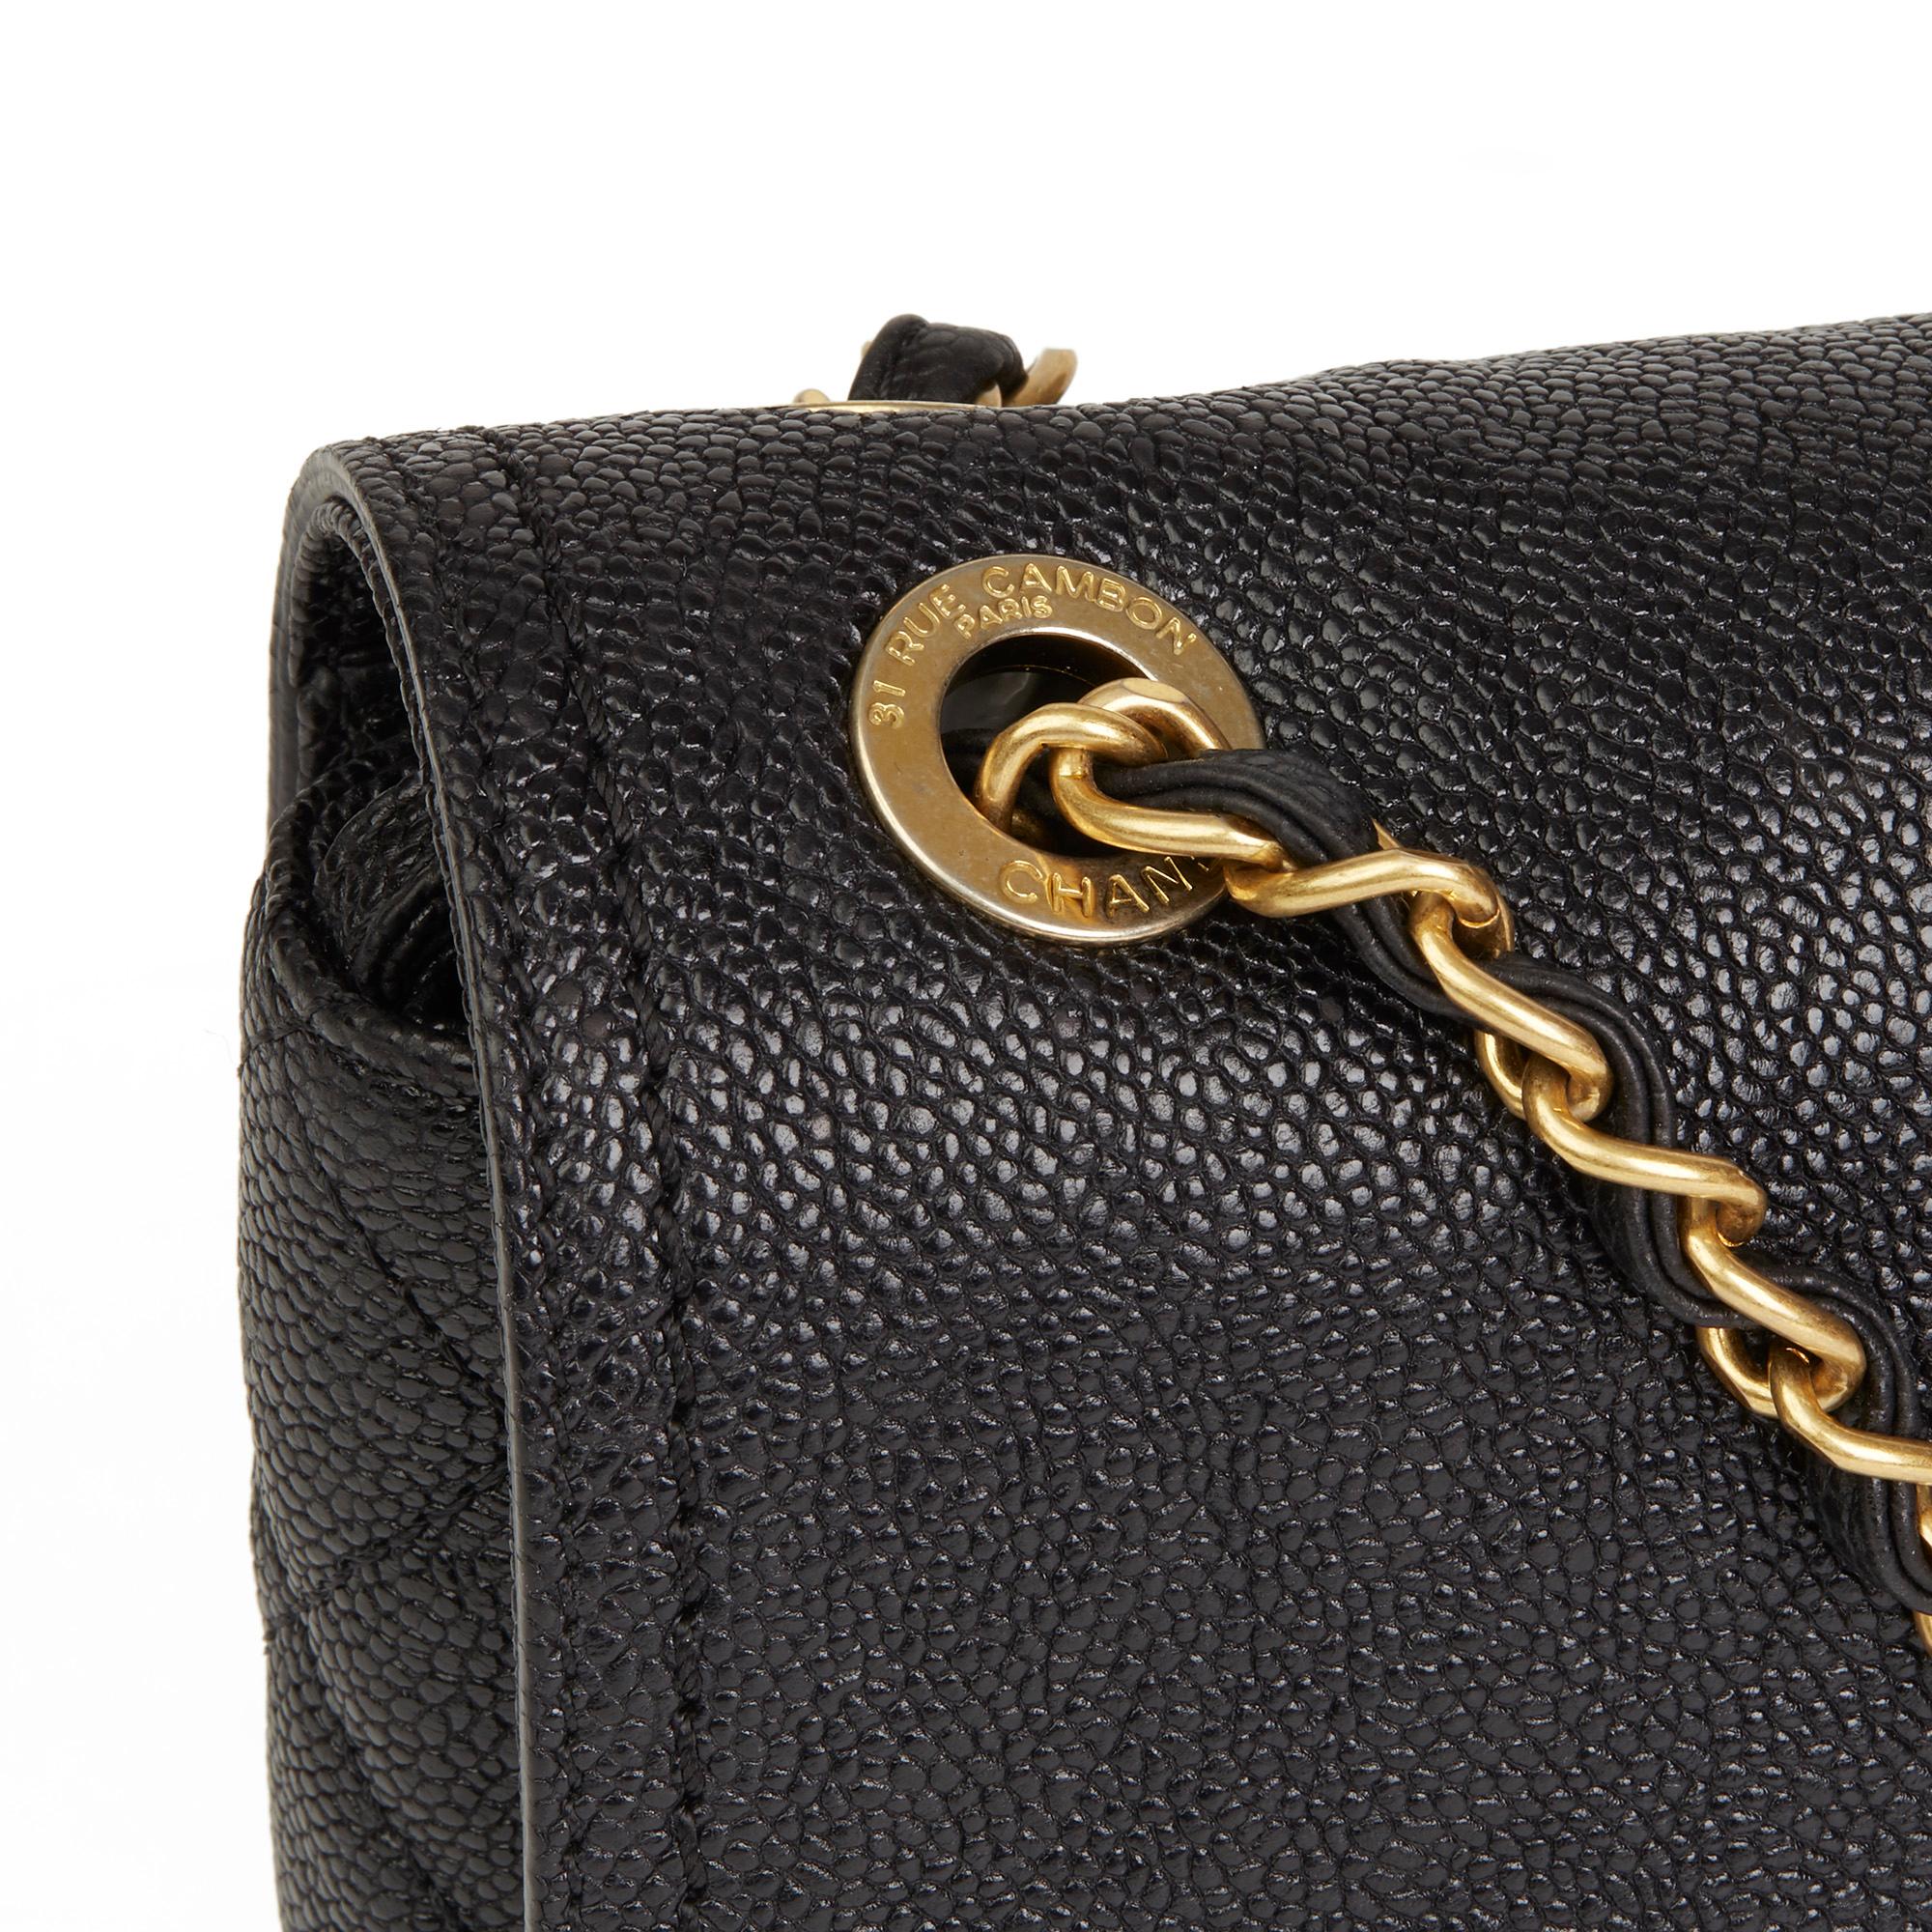 2012 Chanel Black Quilted Caviar Leather 2.55 Reissue Classic Single Flap Bag 3